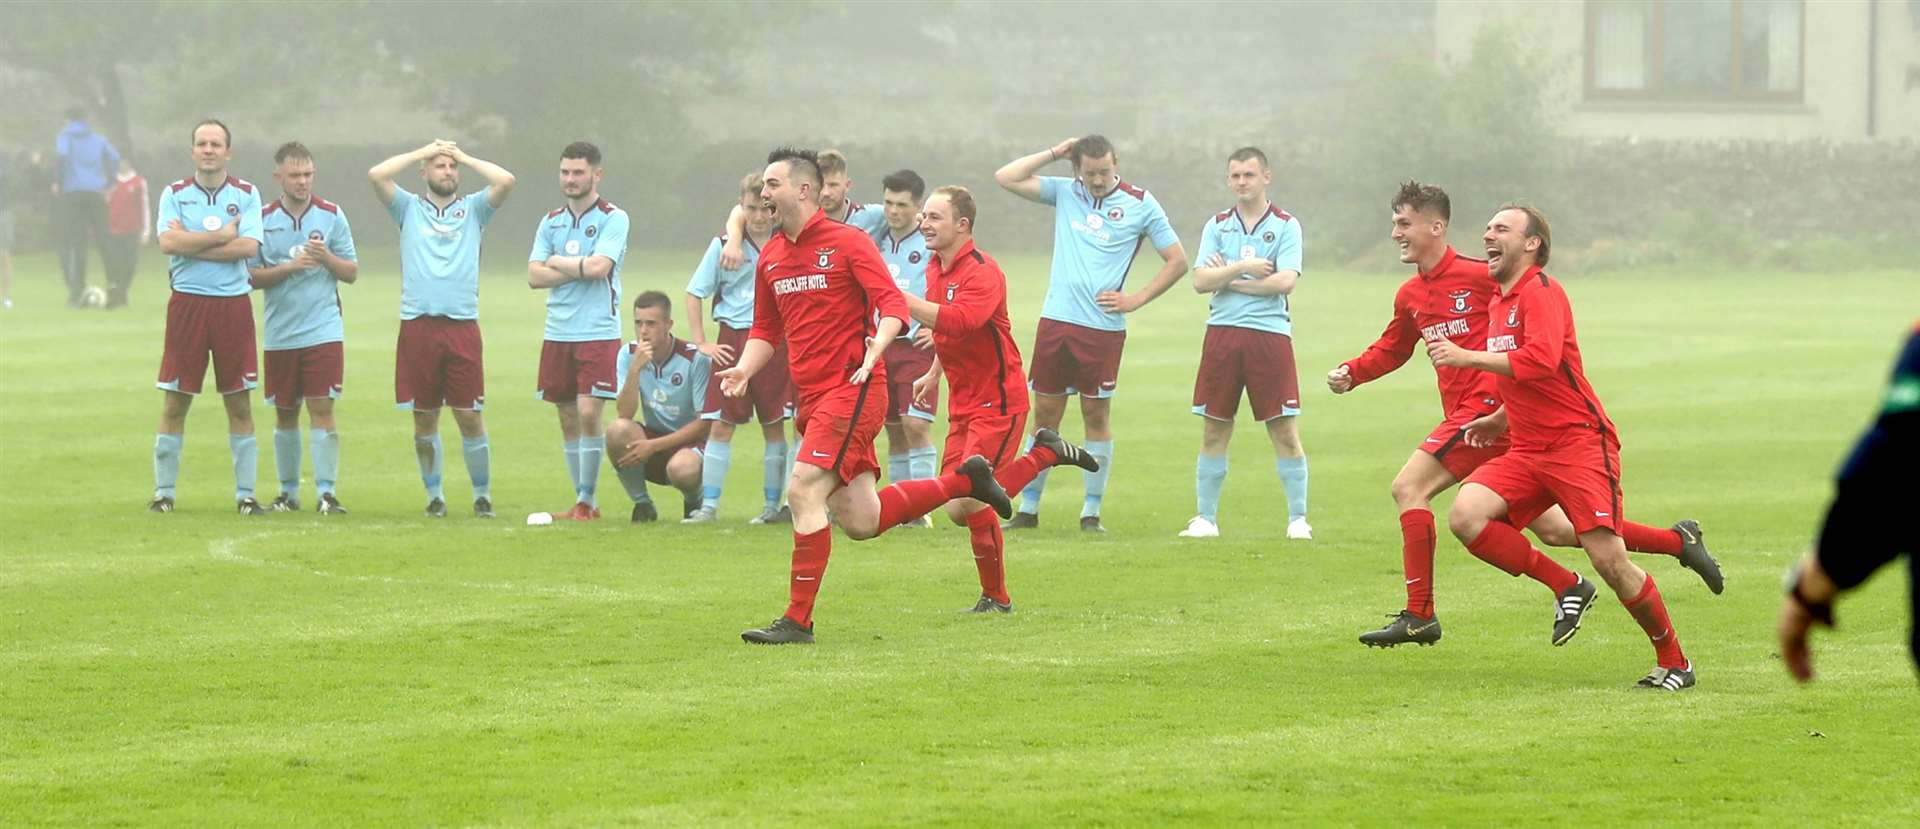 Wick Groats get the party underway after winning their penalty shootout thriller against Pentland United 5-3 following a 2-2 draw after extra-time. They will now face Avoch in the Highland Amateur Cup final later this month. Picture: James Gunn